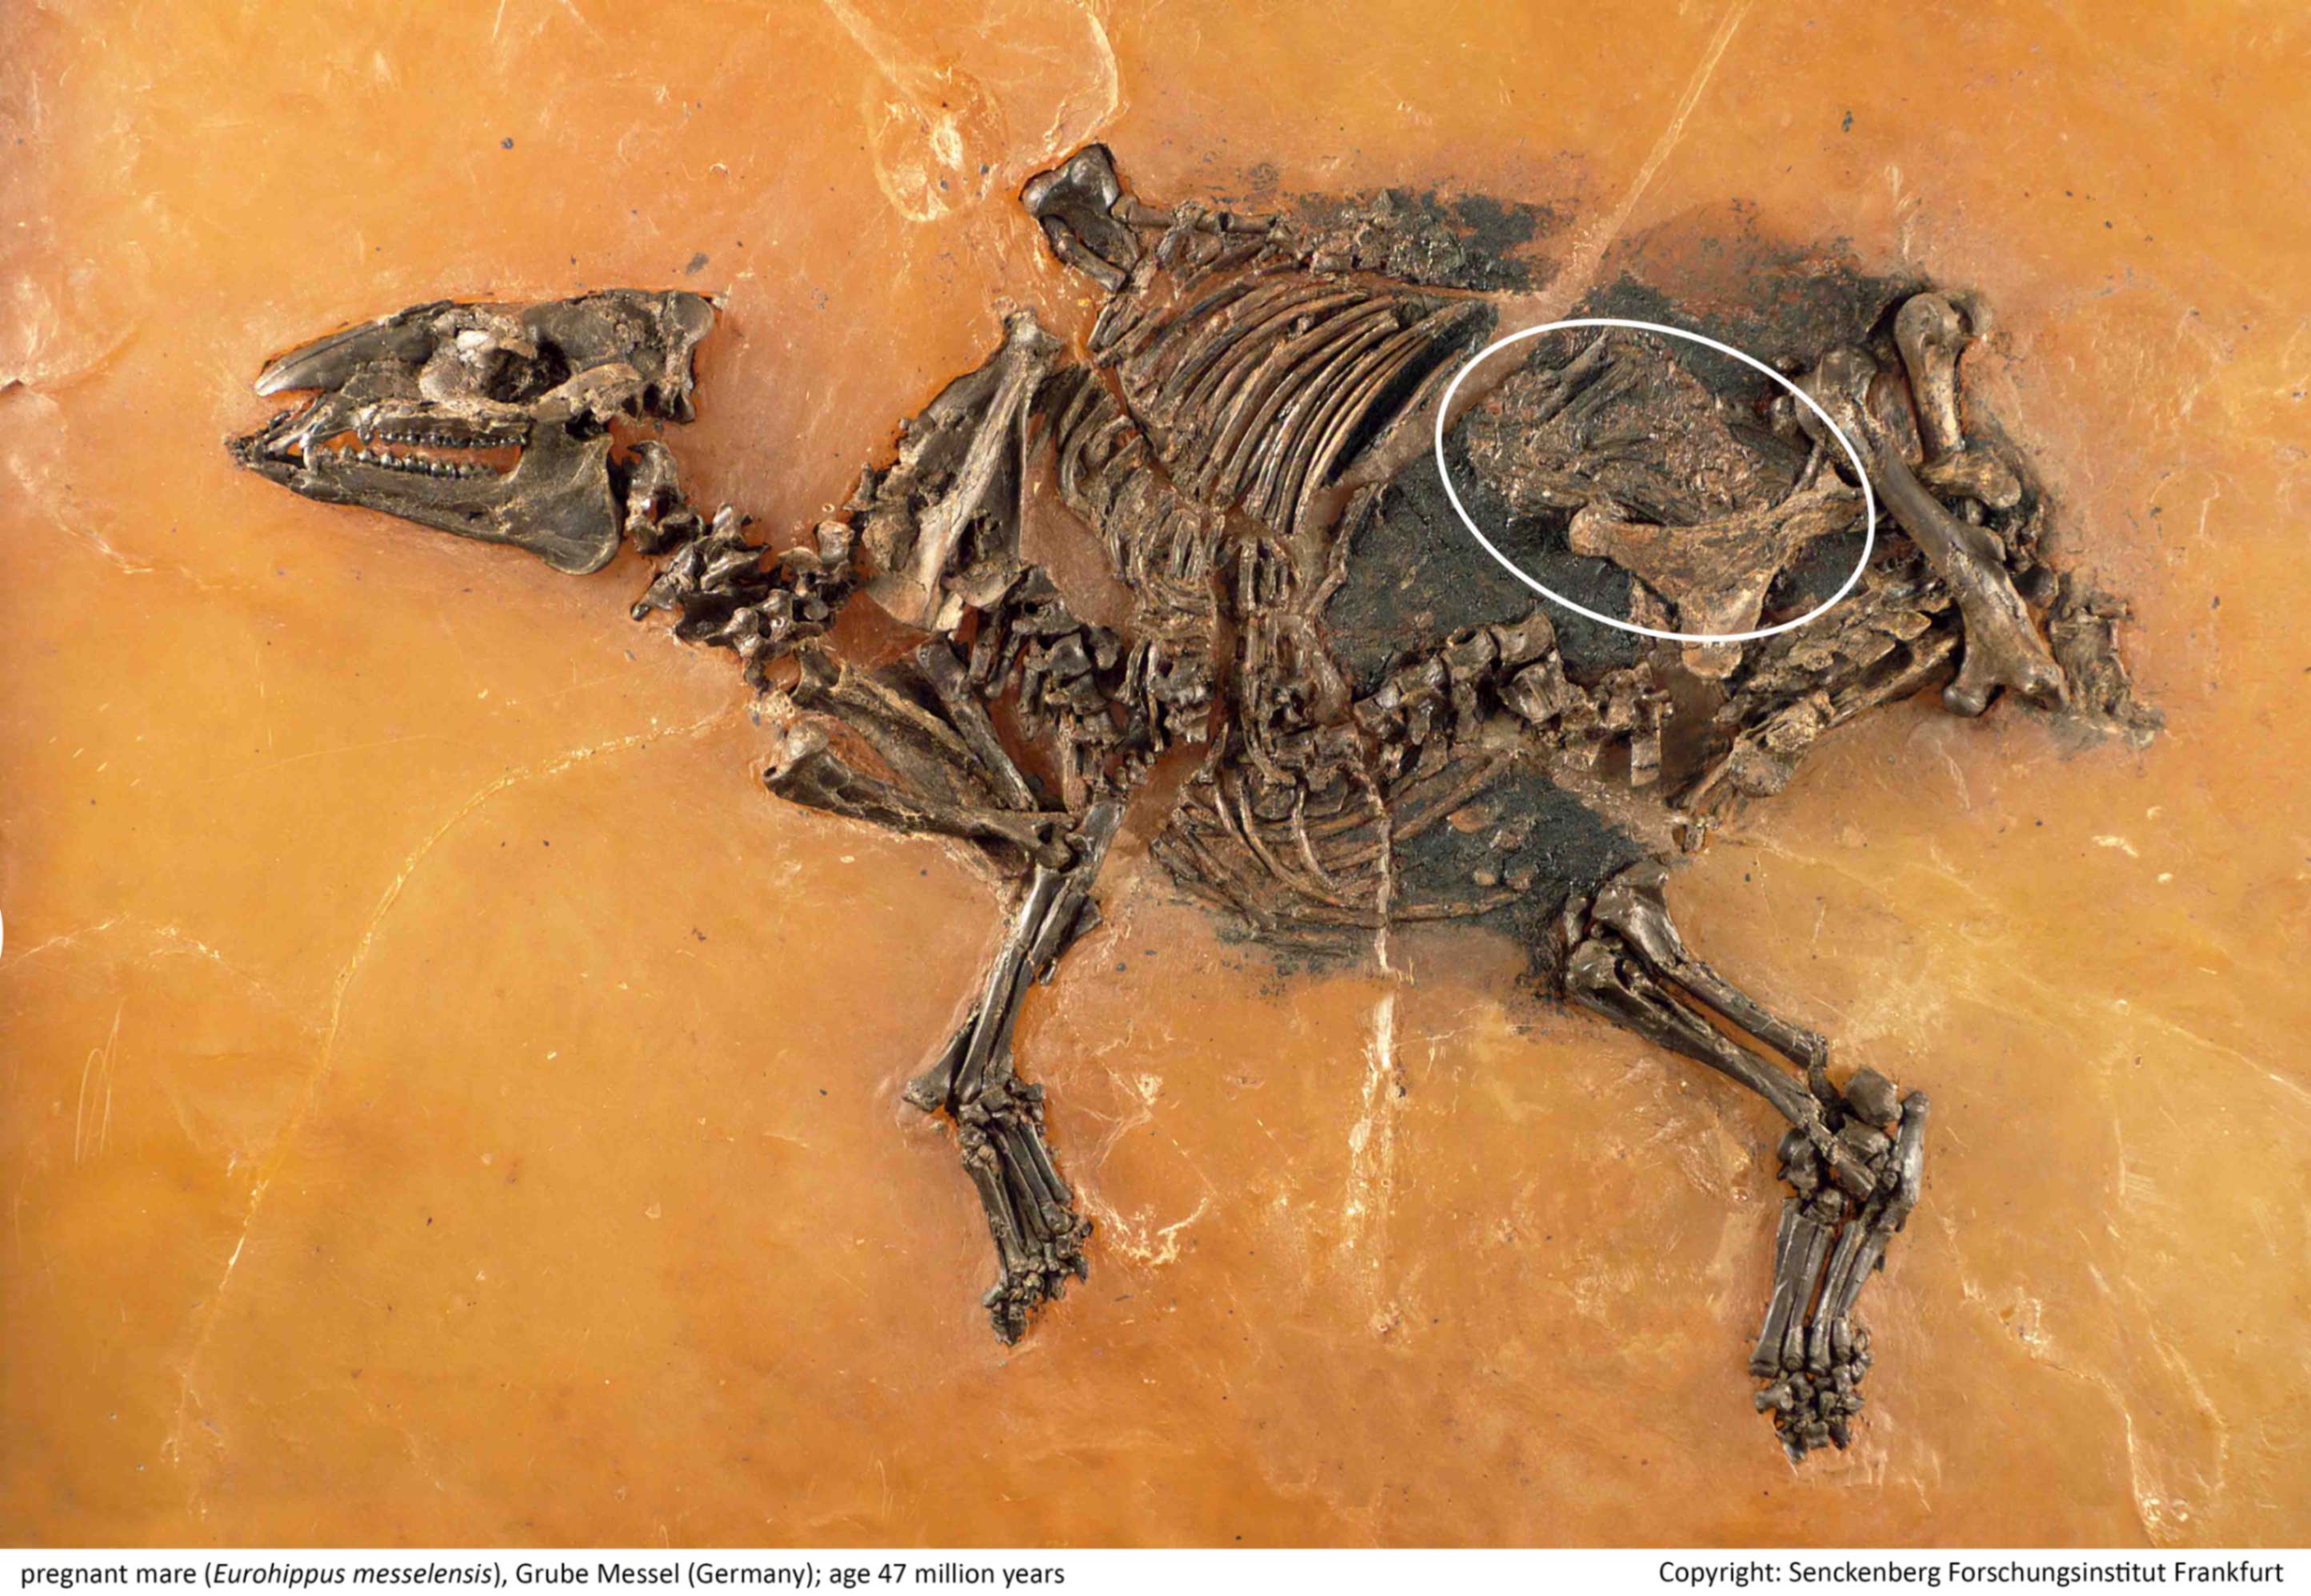 48 million years after the mother died before giving birth, the fossil of an unborn “horse” was found still within the womb